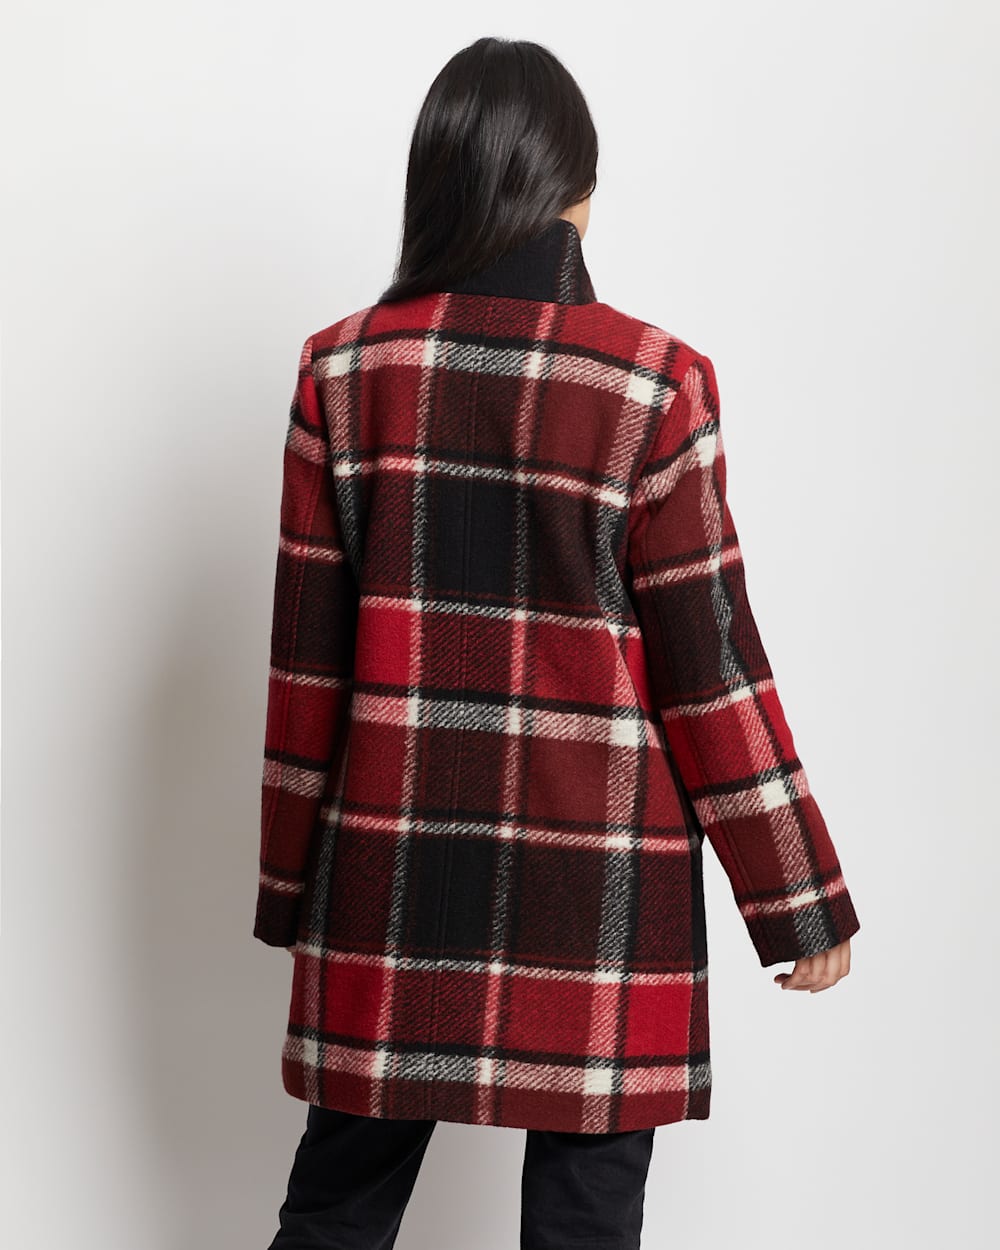 ALTERNATE VIEW OF WOMEN'S CAMDEN TOPPER COAT IN RED/BLACK EXPLODED PLAID image number 3